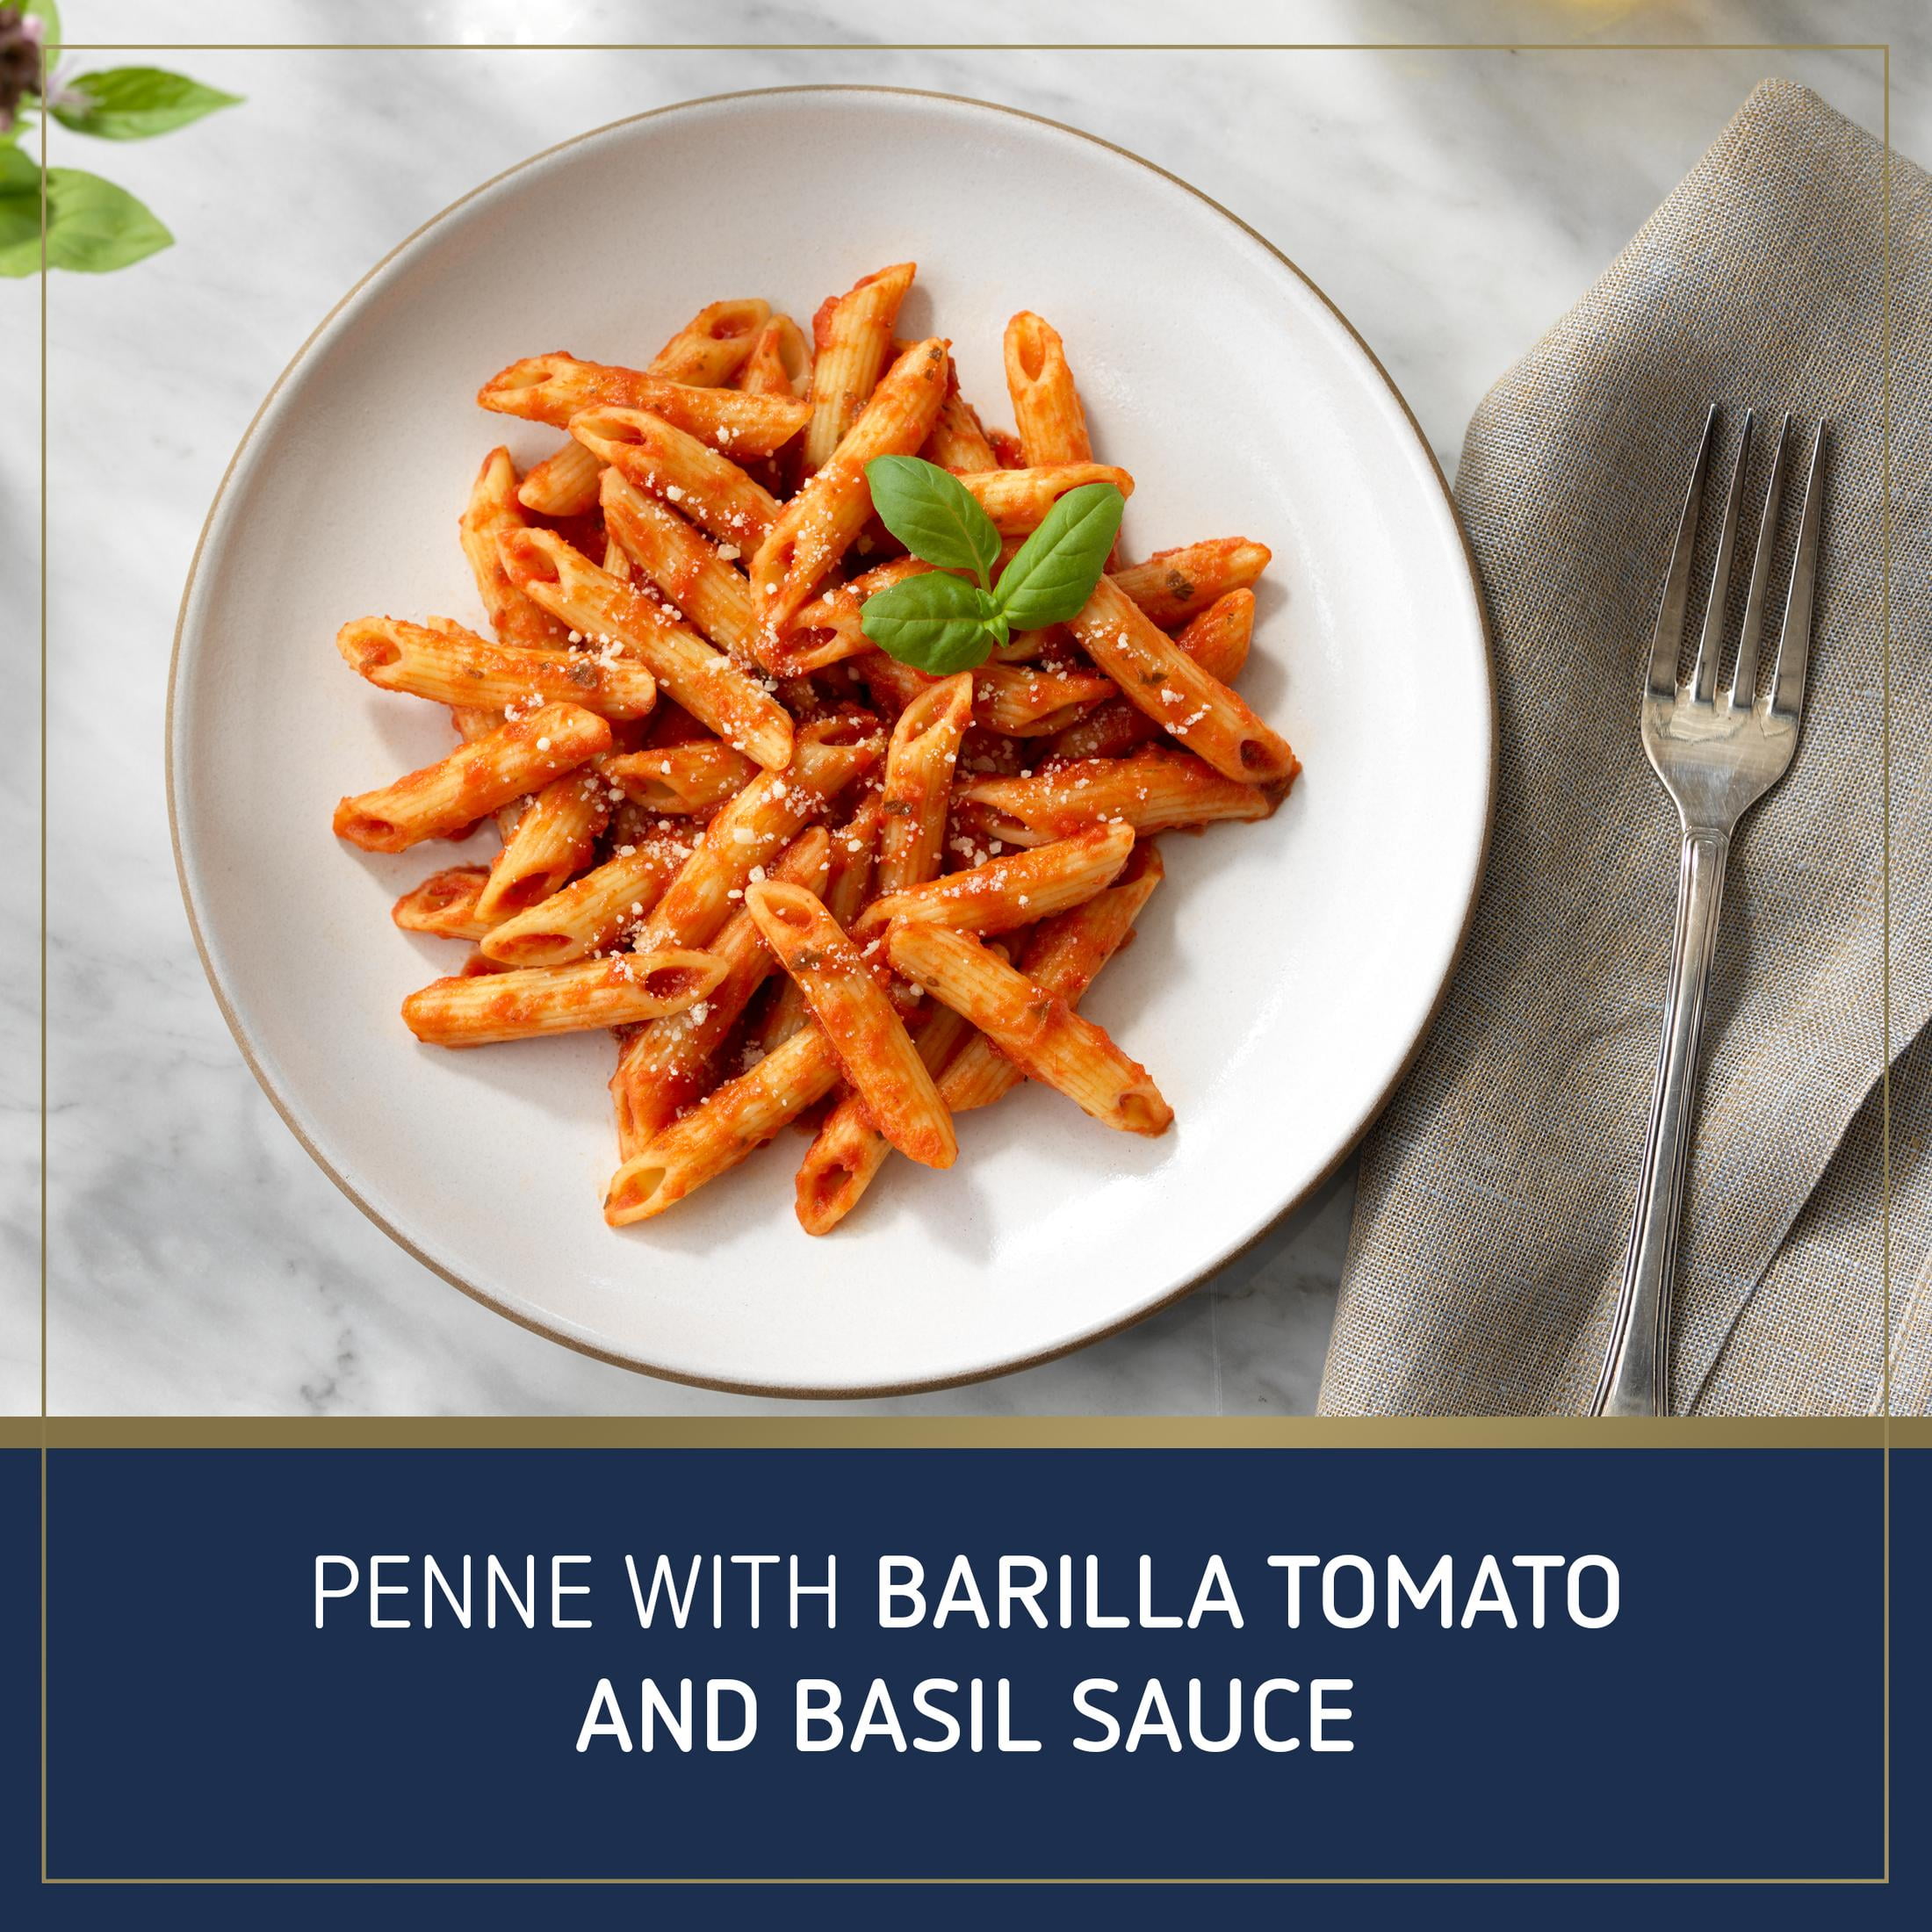 BARILLA Premium Pasta Sauce Variety Pack Tomato & Basil and Traditional  Tomato, 24 Ounce Jar (Pack of 4) - No Added Sugar, Artificial Colors,  Flavors